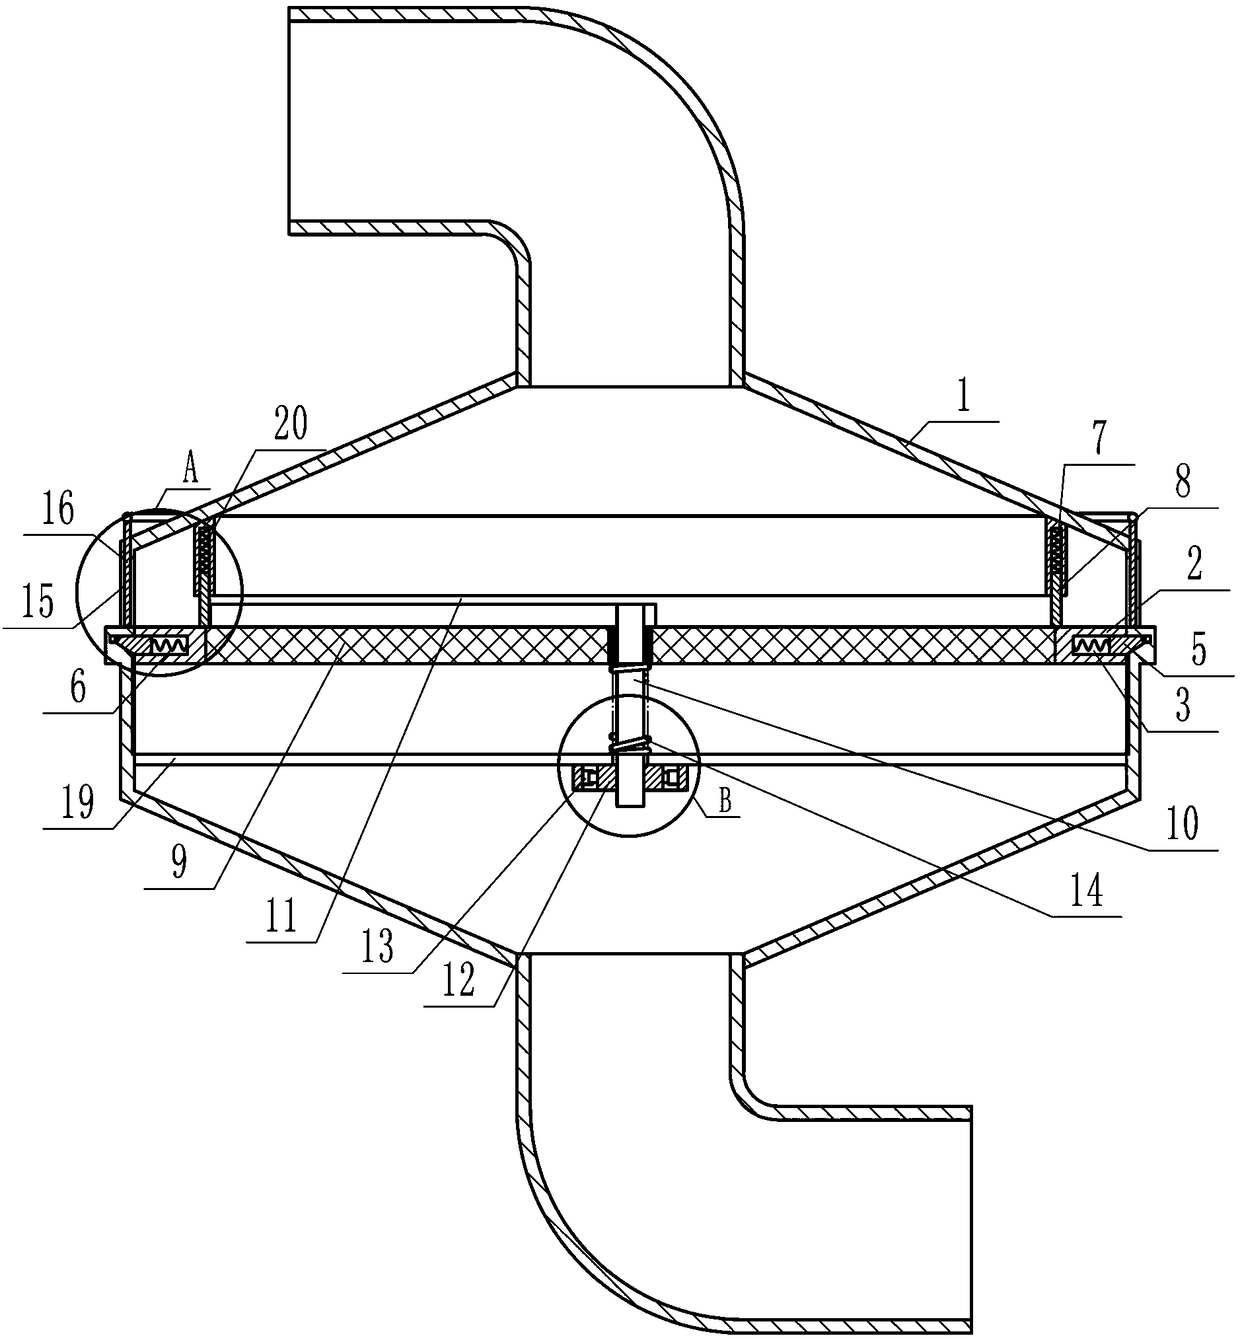 Primary filtering device for sewage treatment